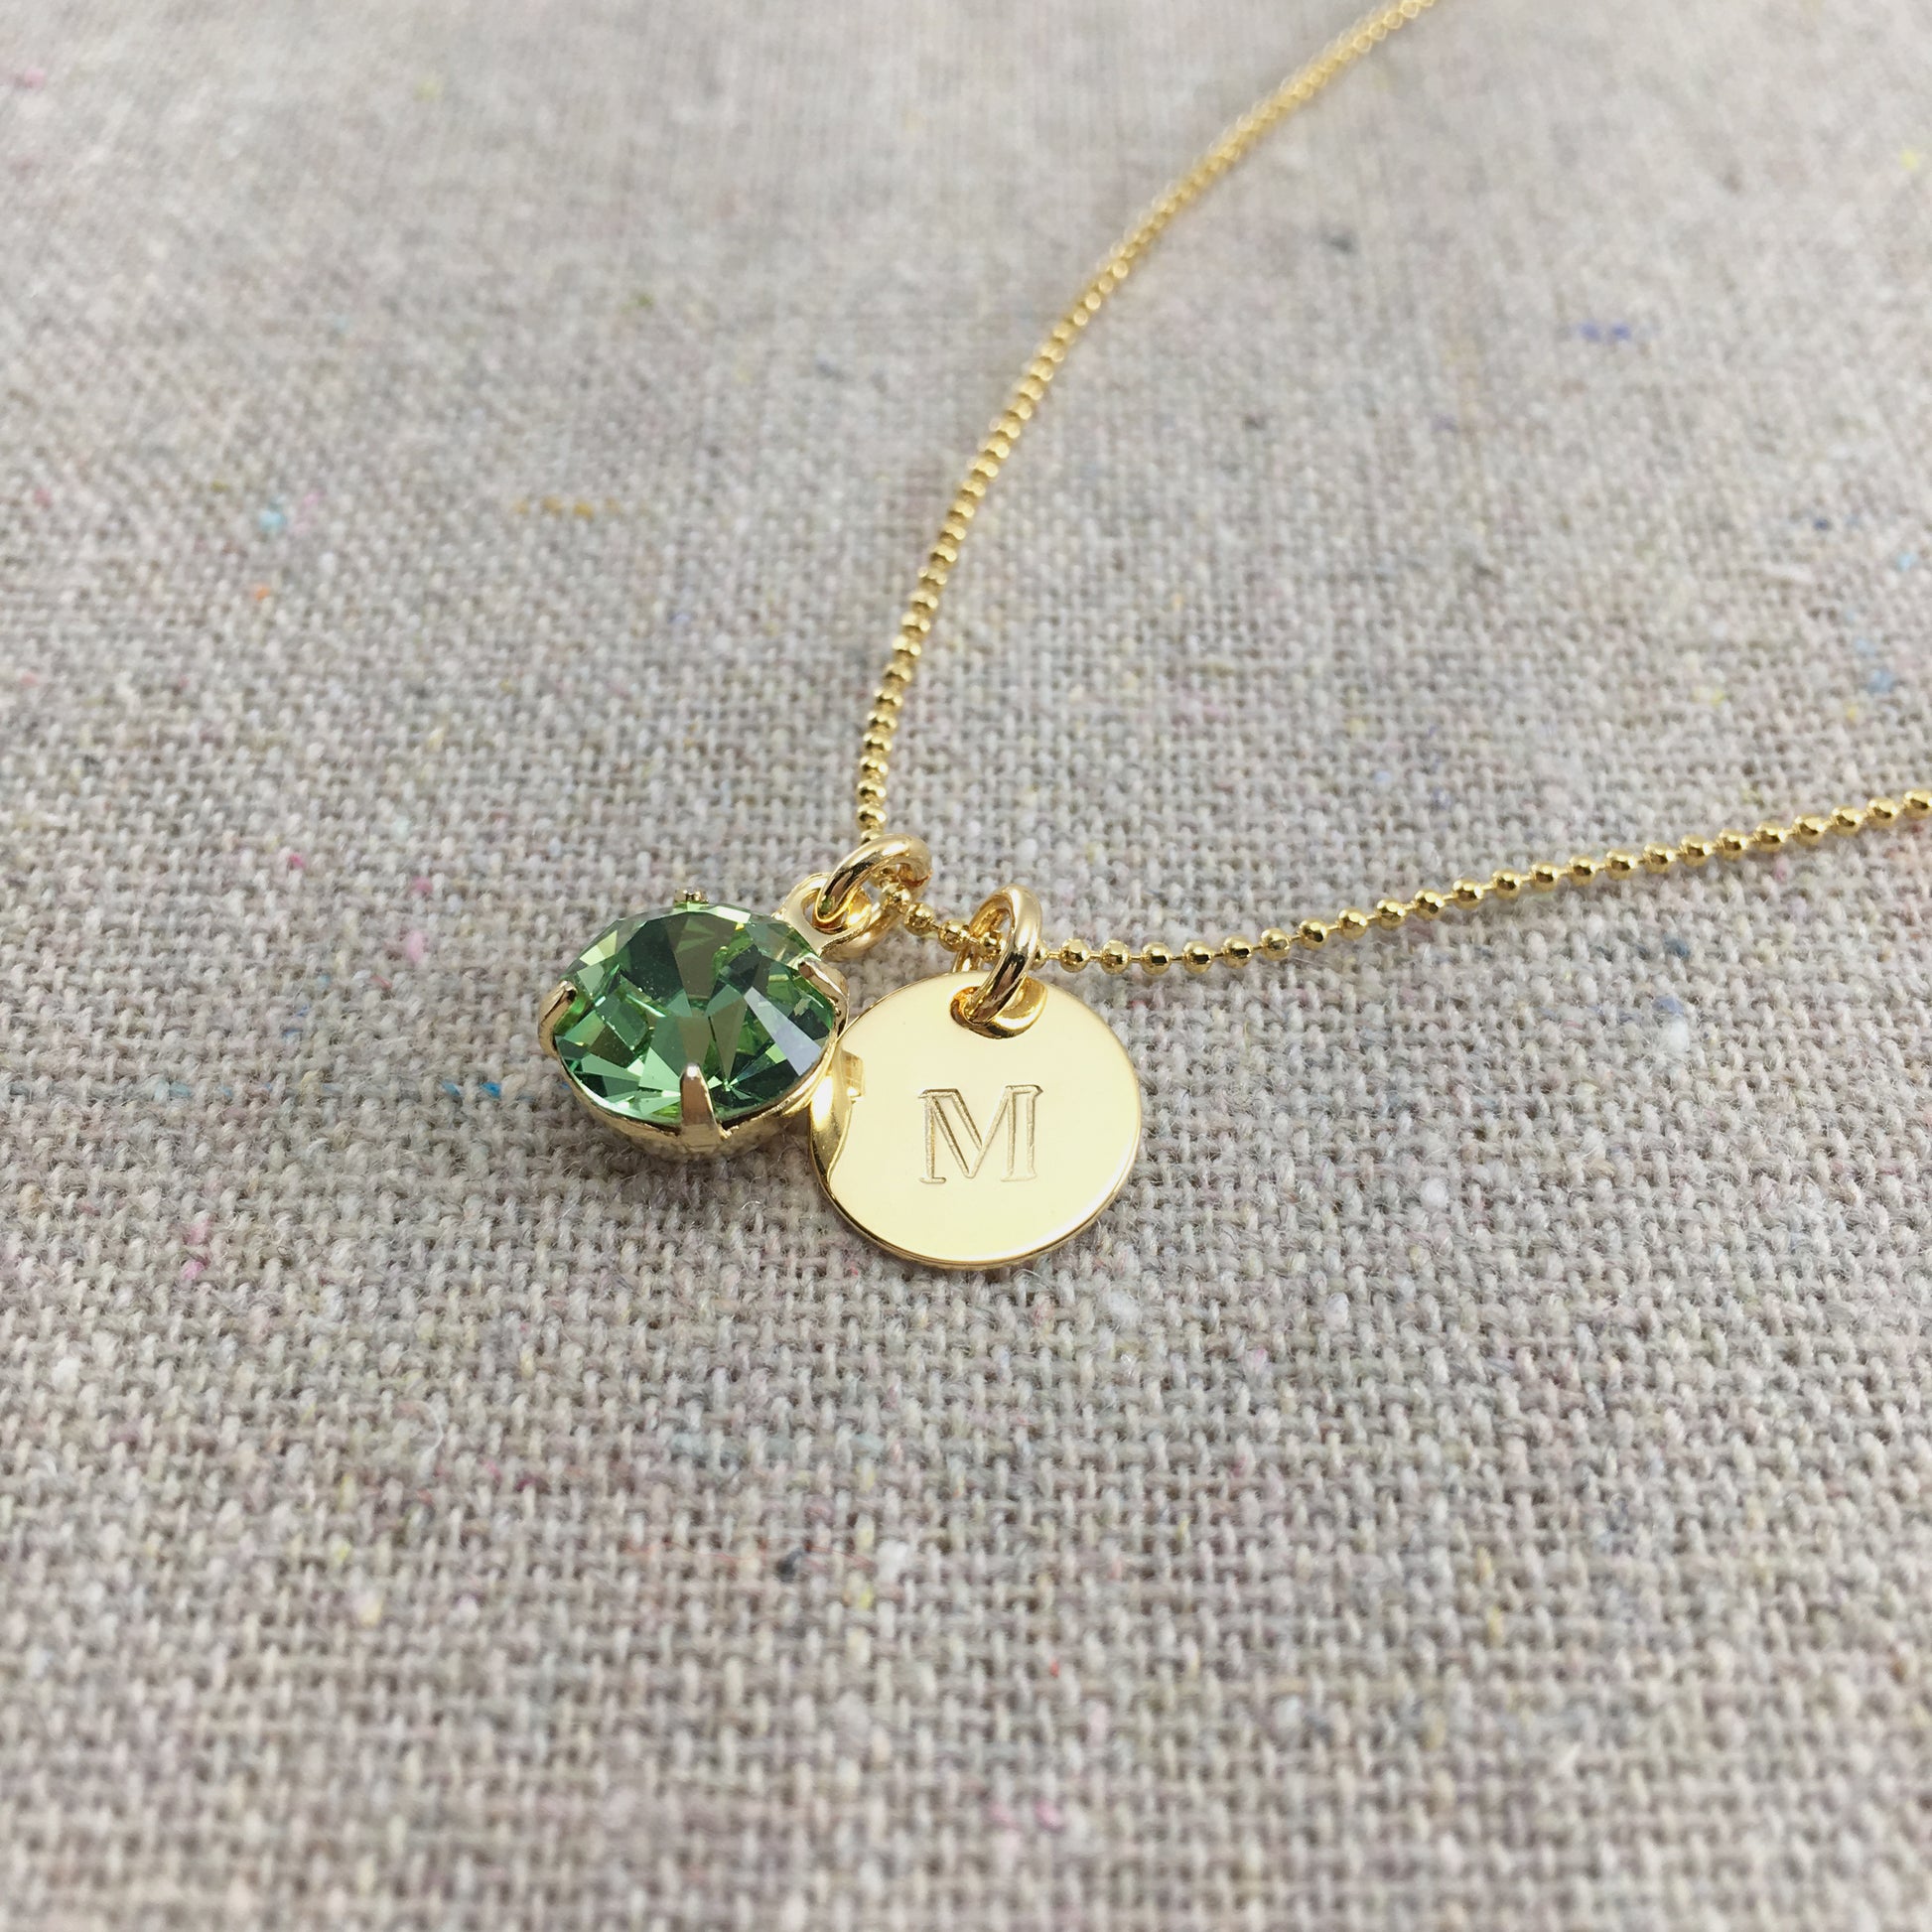 Tiny Name Tag Charm, Personalized Birthstone Necklace, Gold Name Tag Pendant,  Monogram Initial, Custom Engraved, Mini Name Jewelry